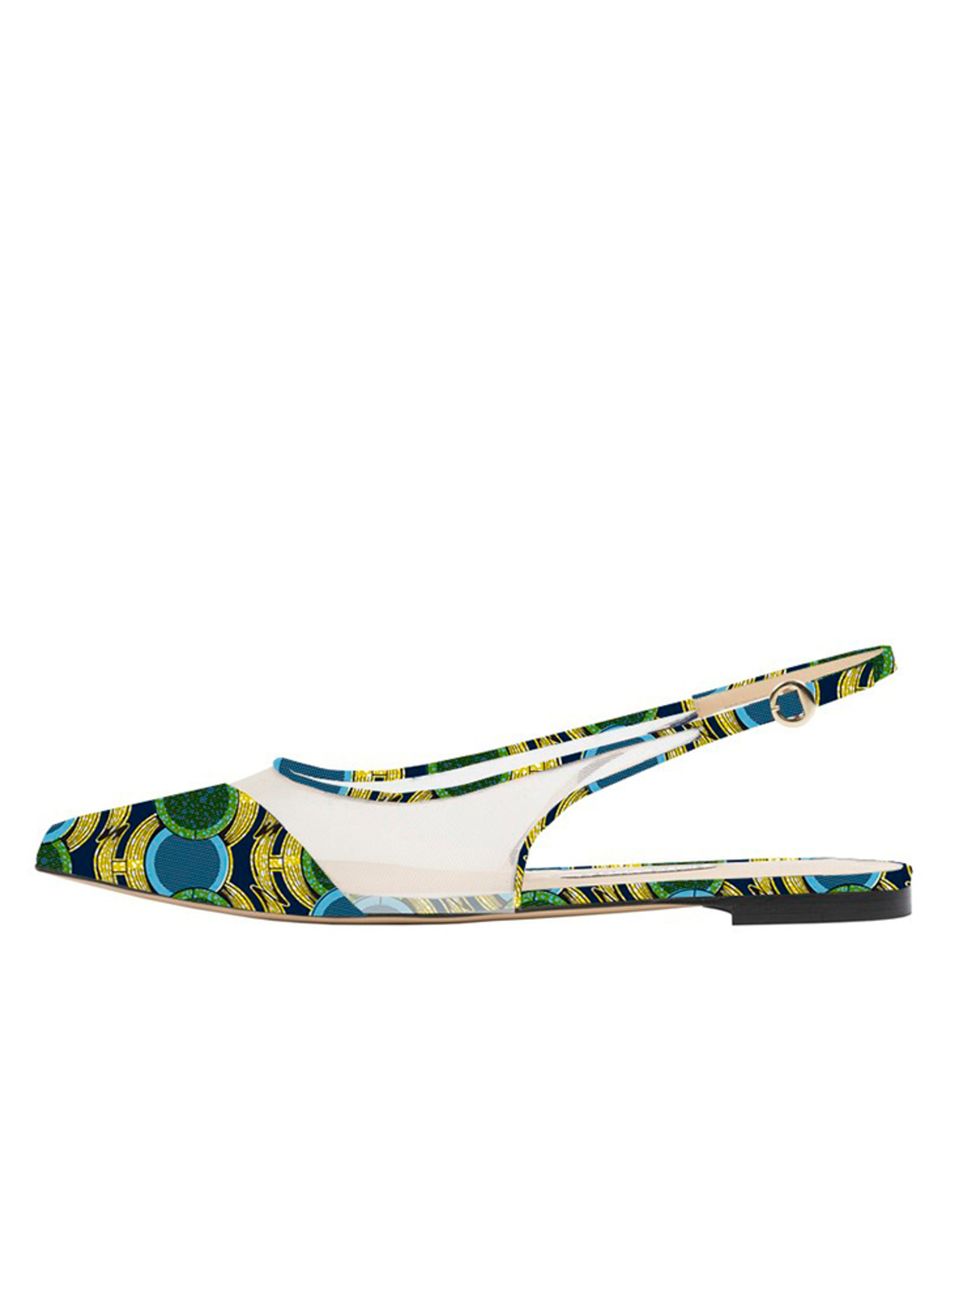 <p>Bionda Castana for M2M <a href="http://biondacastana.com/collections/shoes/products/violet-mothers2mothers-africa-art-deco-design-flat-pointed-slingback" target="_blank">'Violet shoes'</a>, £375</p>